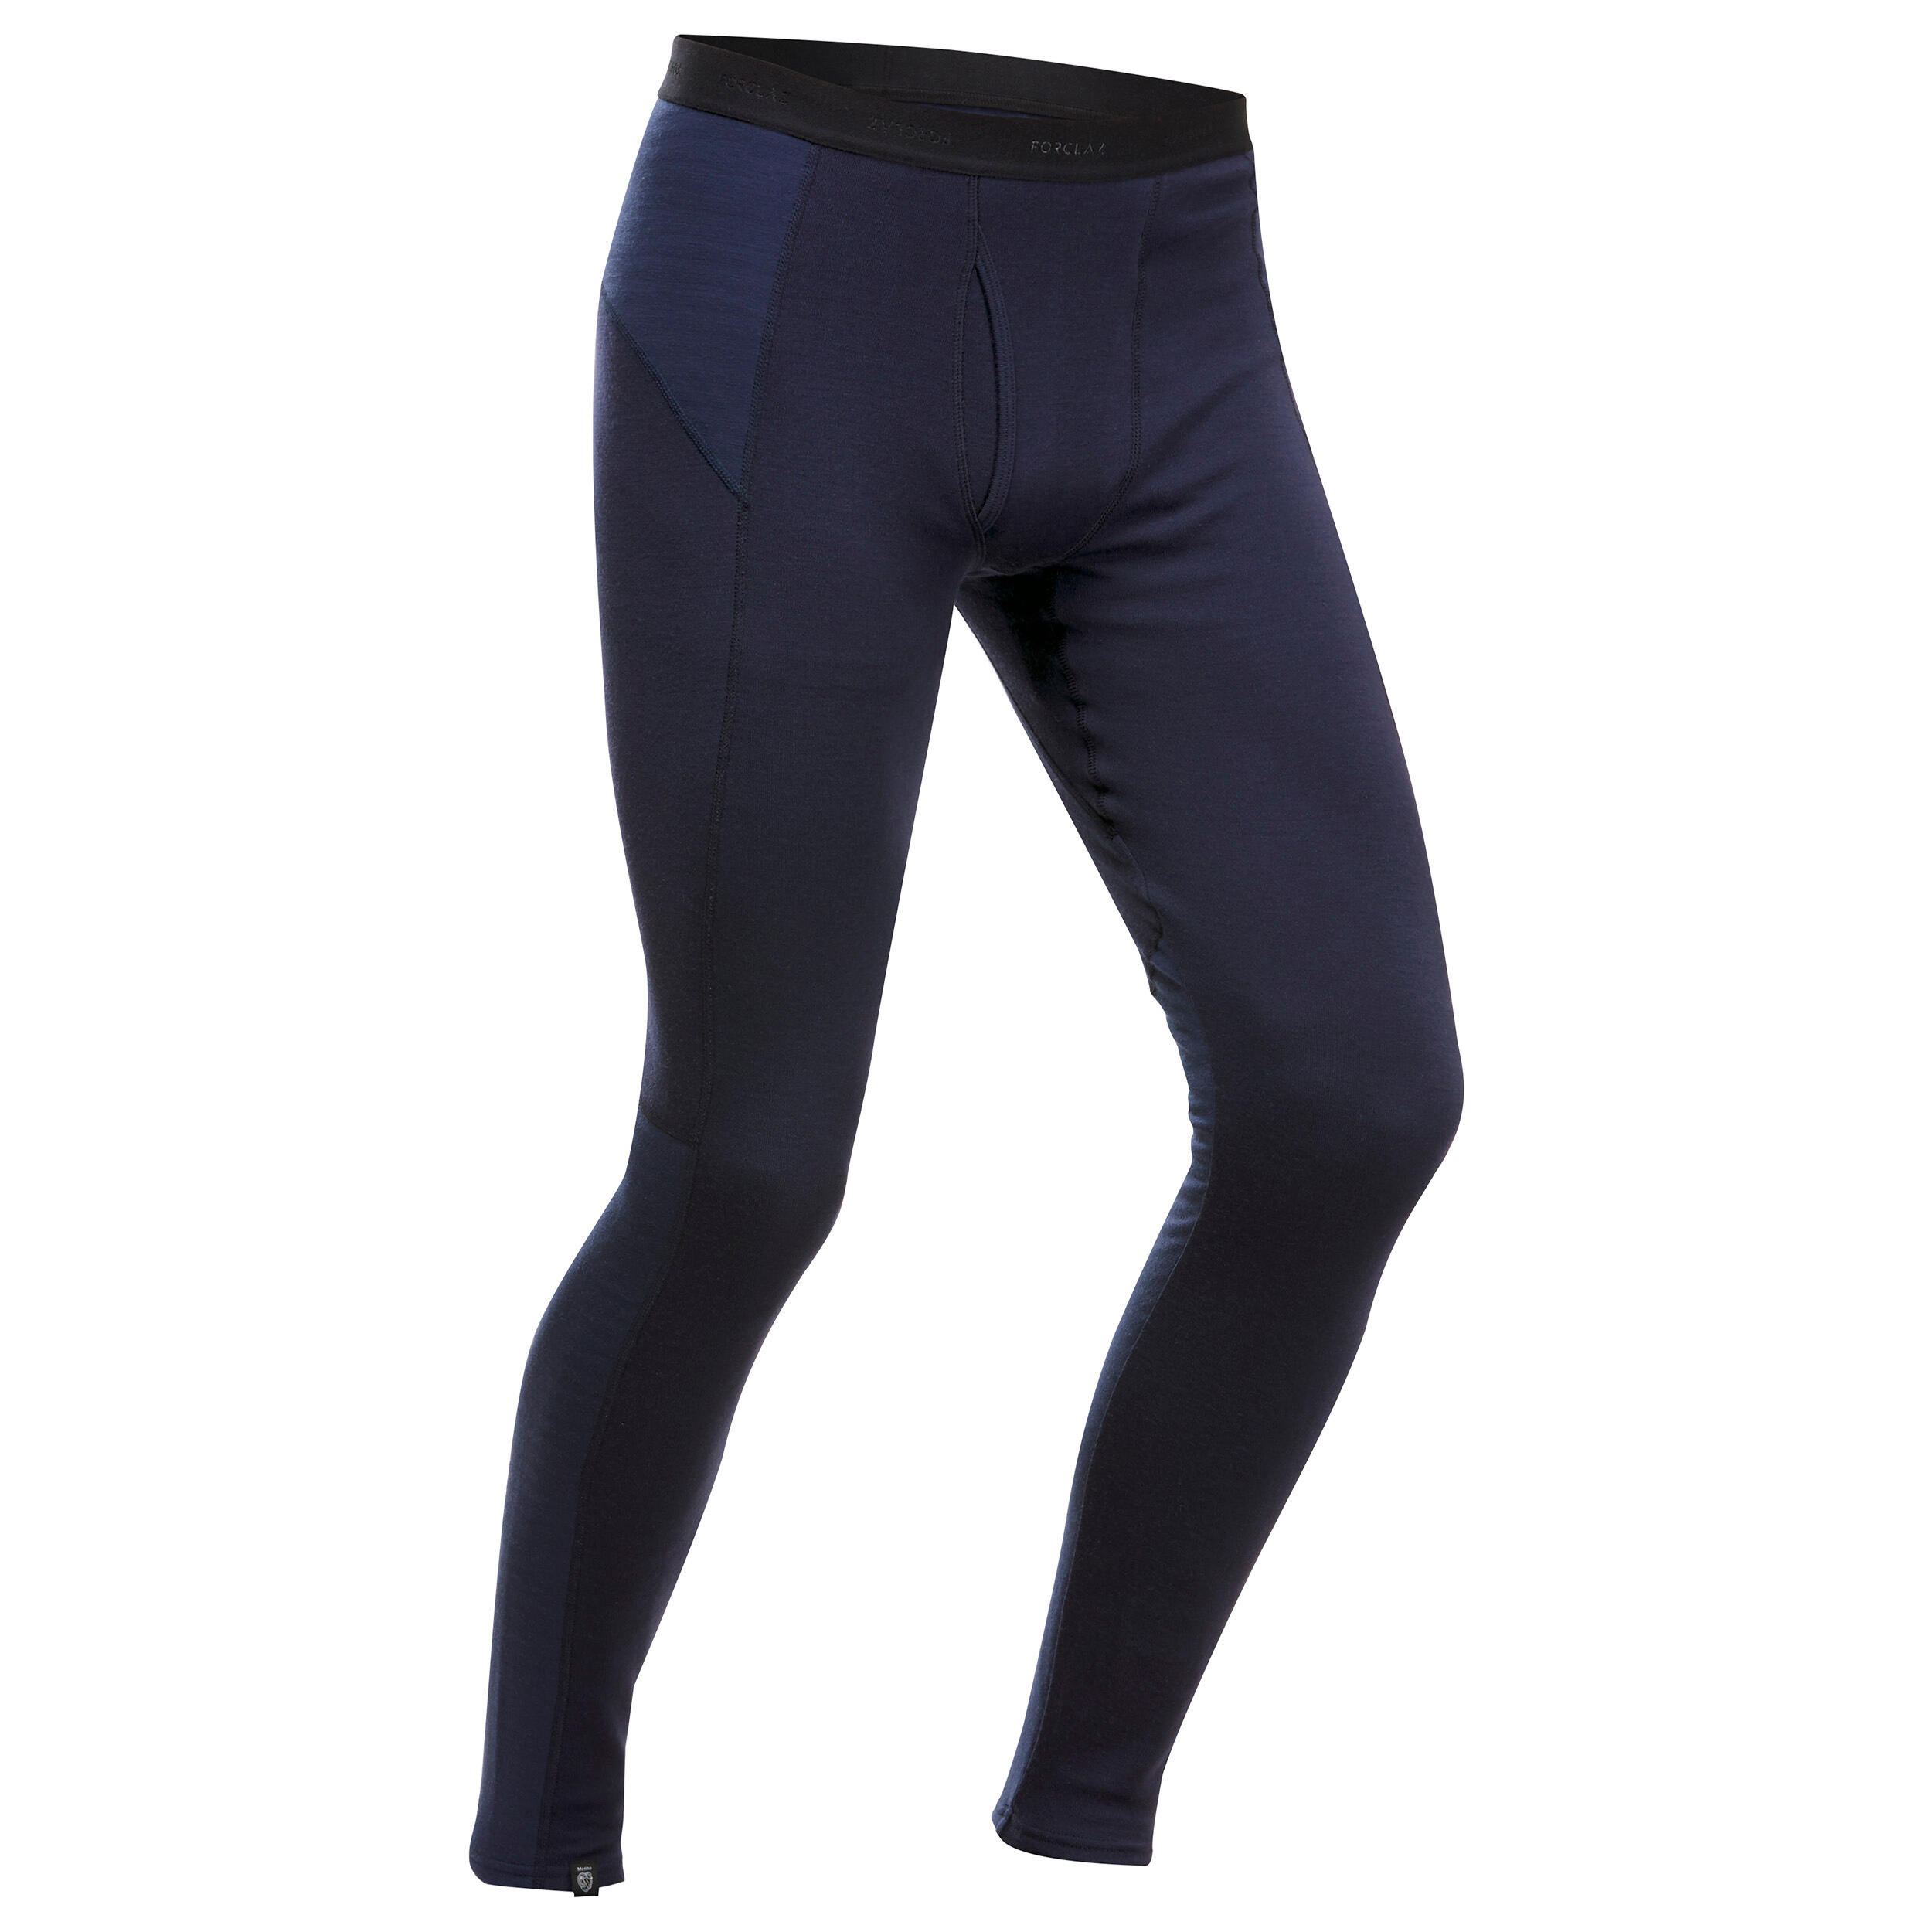 Athletic Sports Leggings & Running Tights Bottoms TSLA 1 or 2 Pack Kid's & Boys & Girls Thermal Compression Pants 